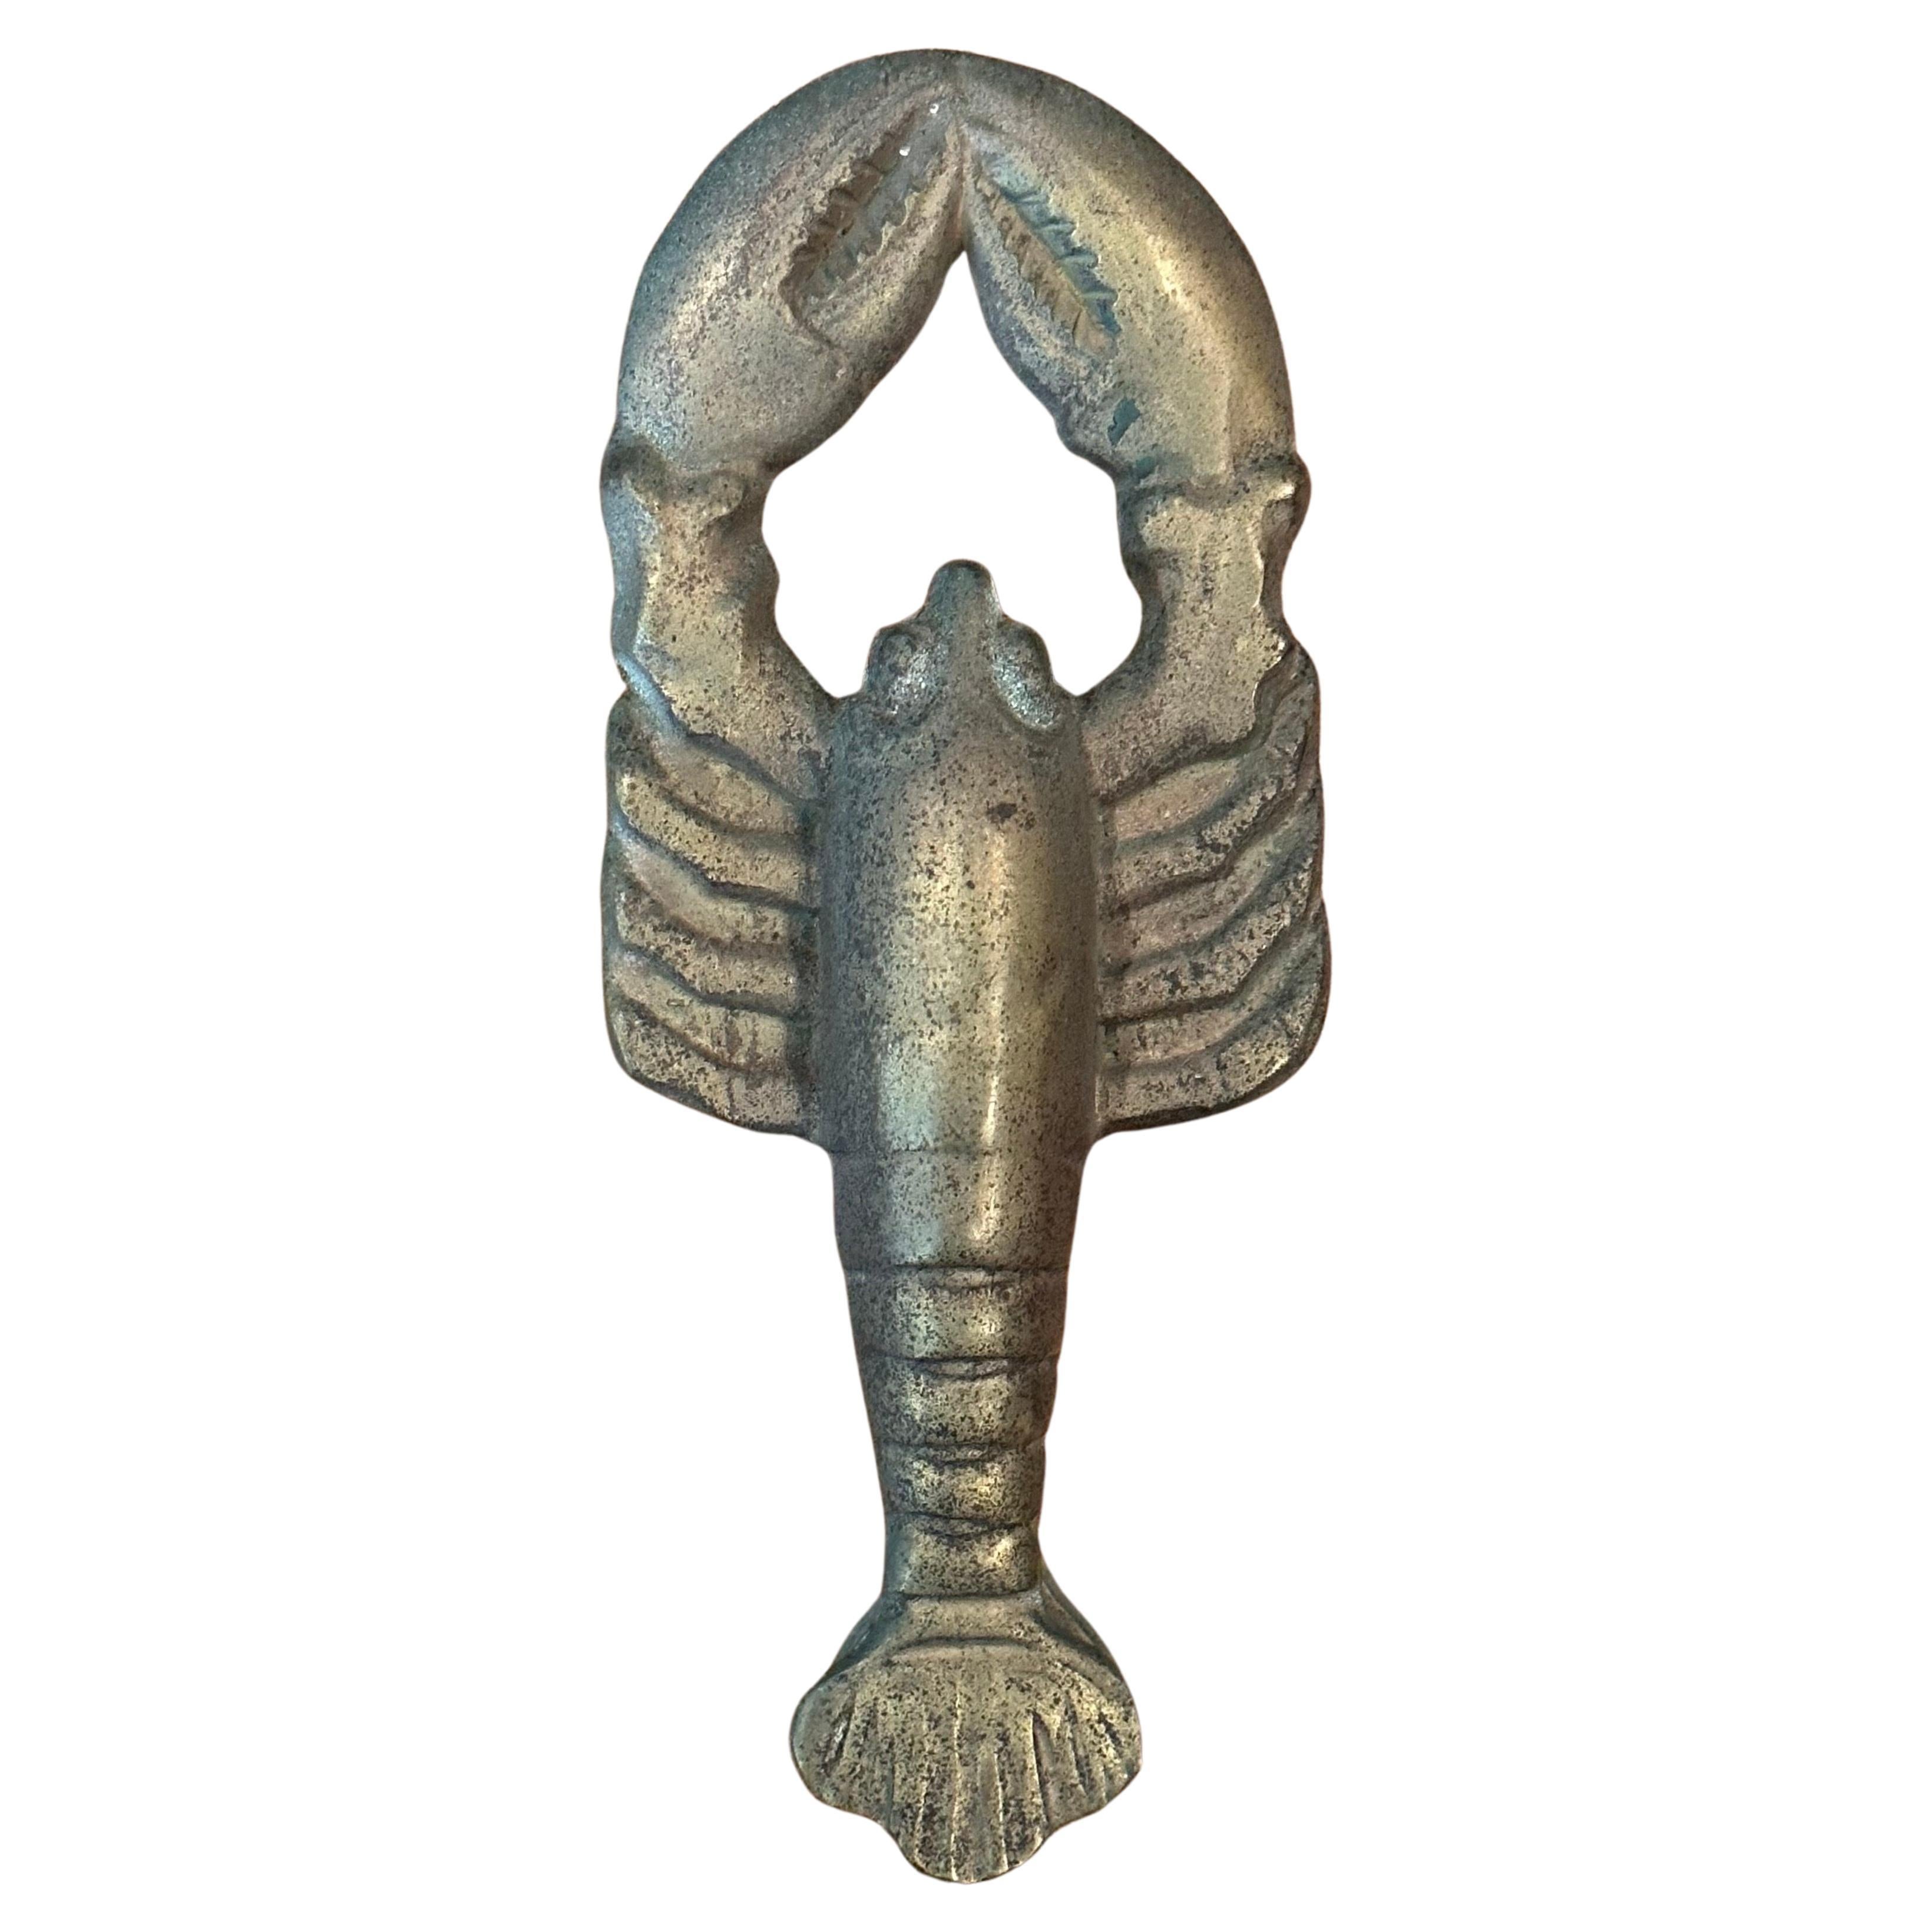 Well worn vintage brass lobster door knocker, circa 1960s. The piece is made of cast brass and is quite solid. The knocker is in very good vintage condition and measures 4